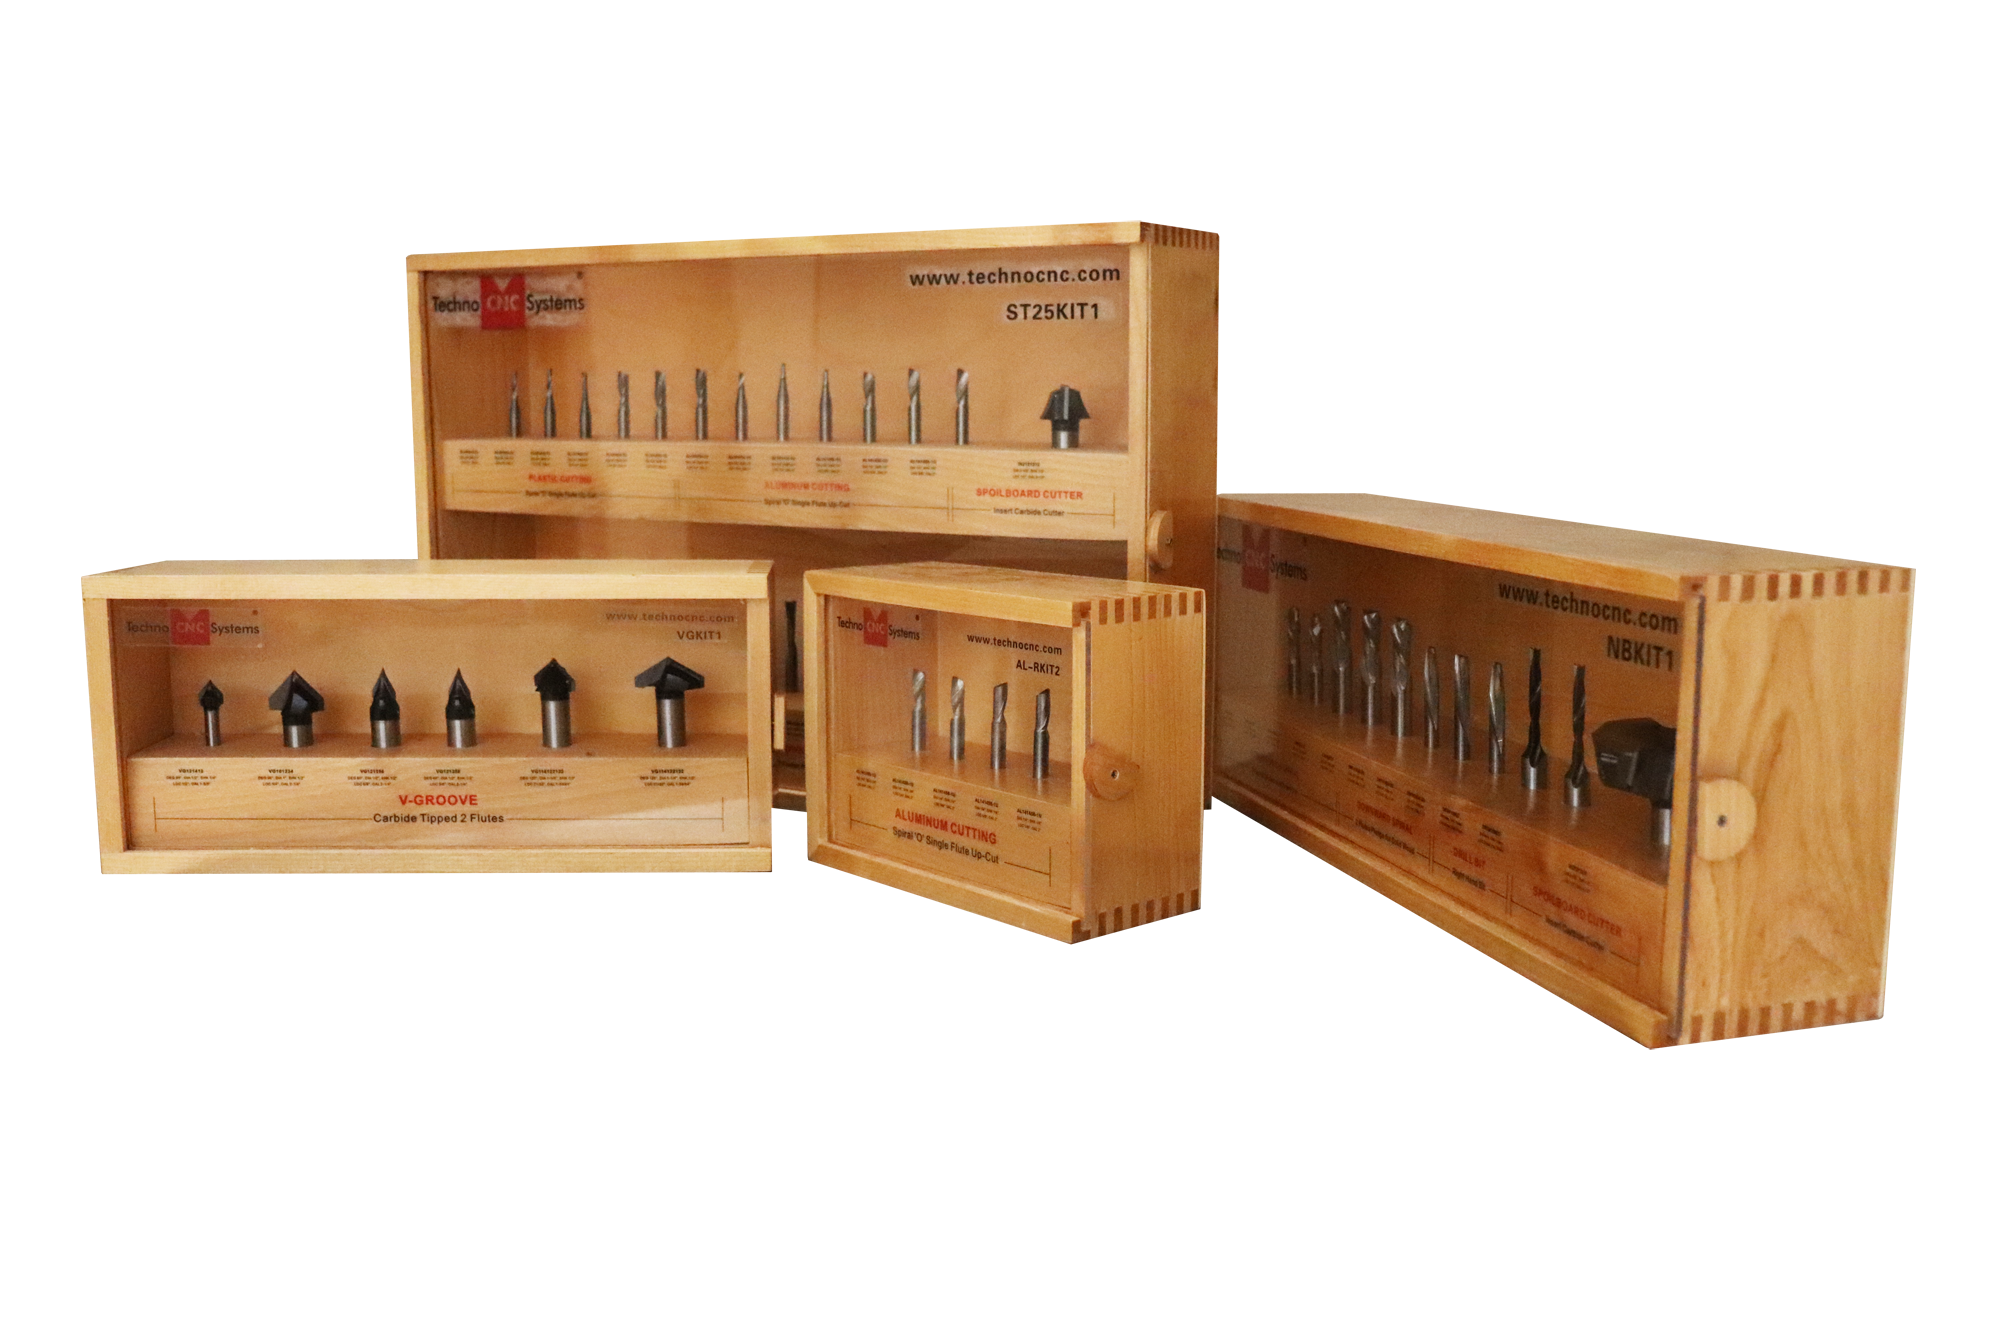 5 Things to Consider When Choosing a CNC Router Bit